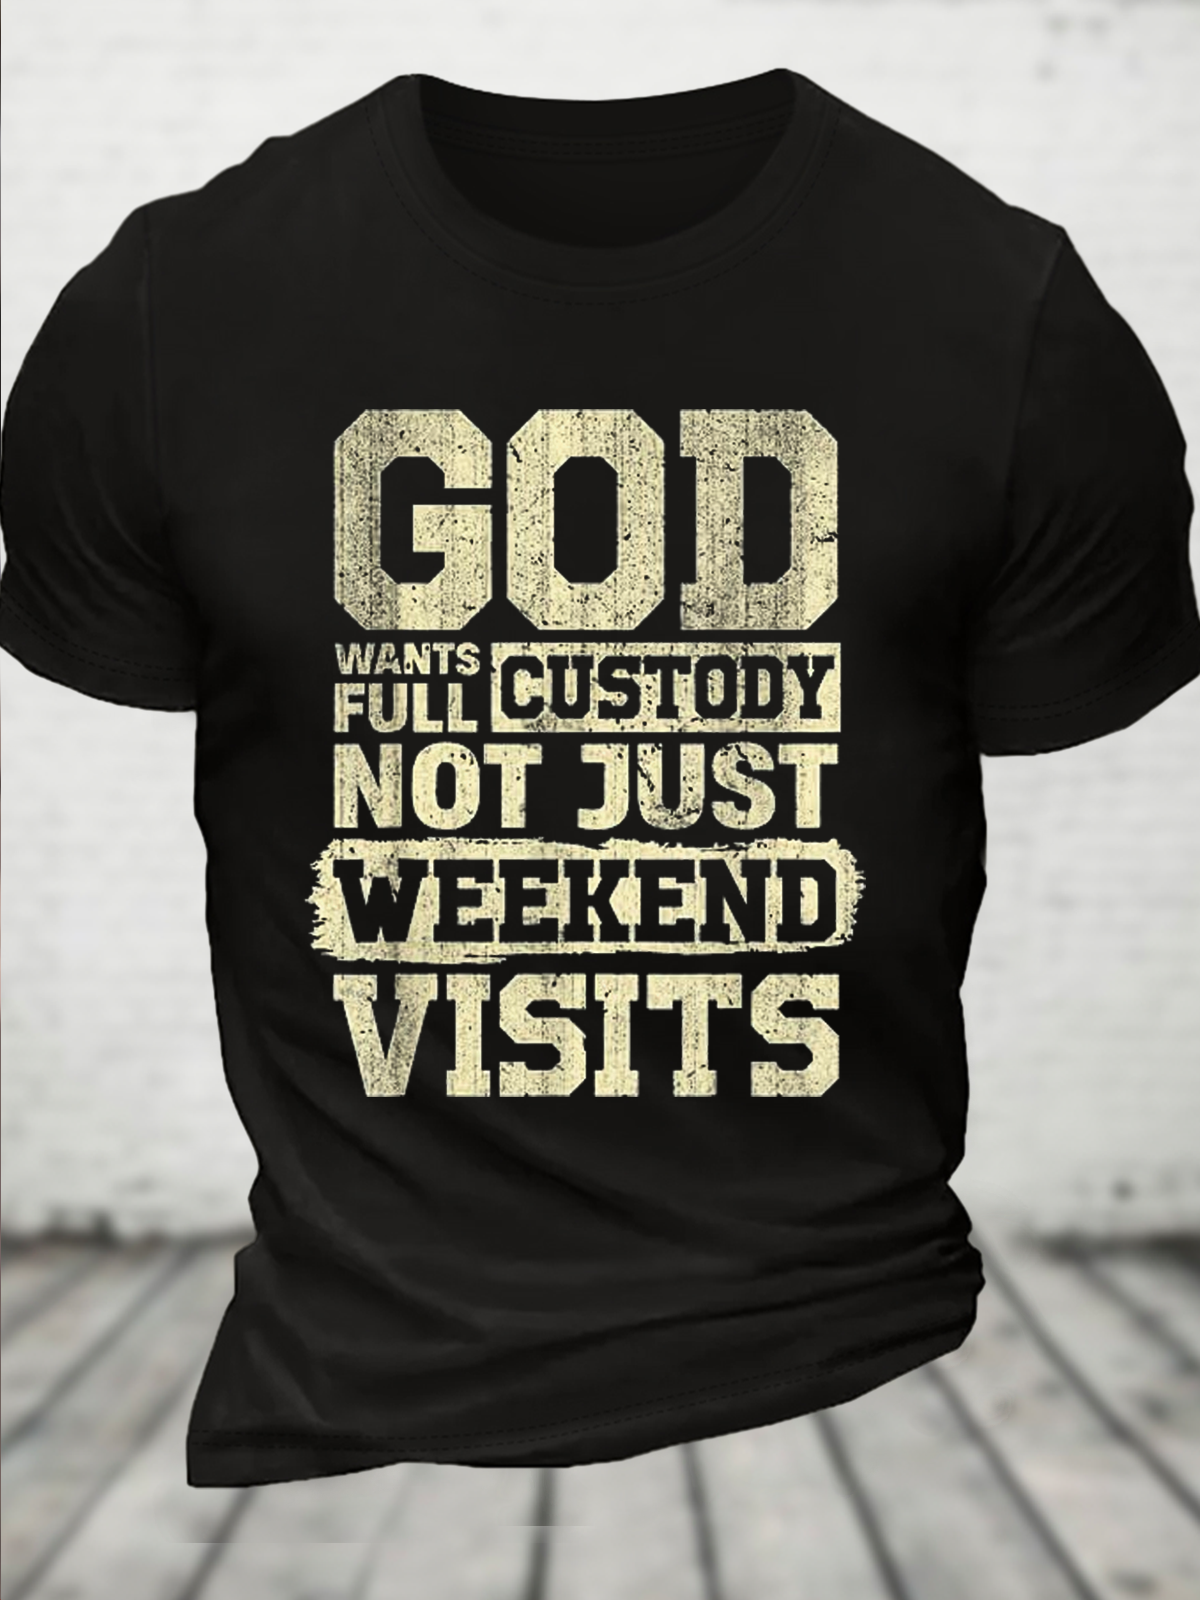 Cotton God Wants Full Custody Not Just Weekends Visits Casual Loose T-Shirt